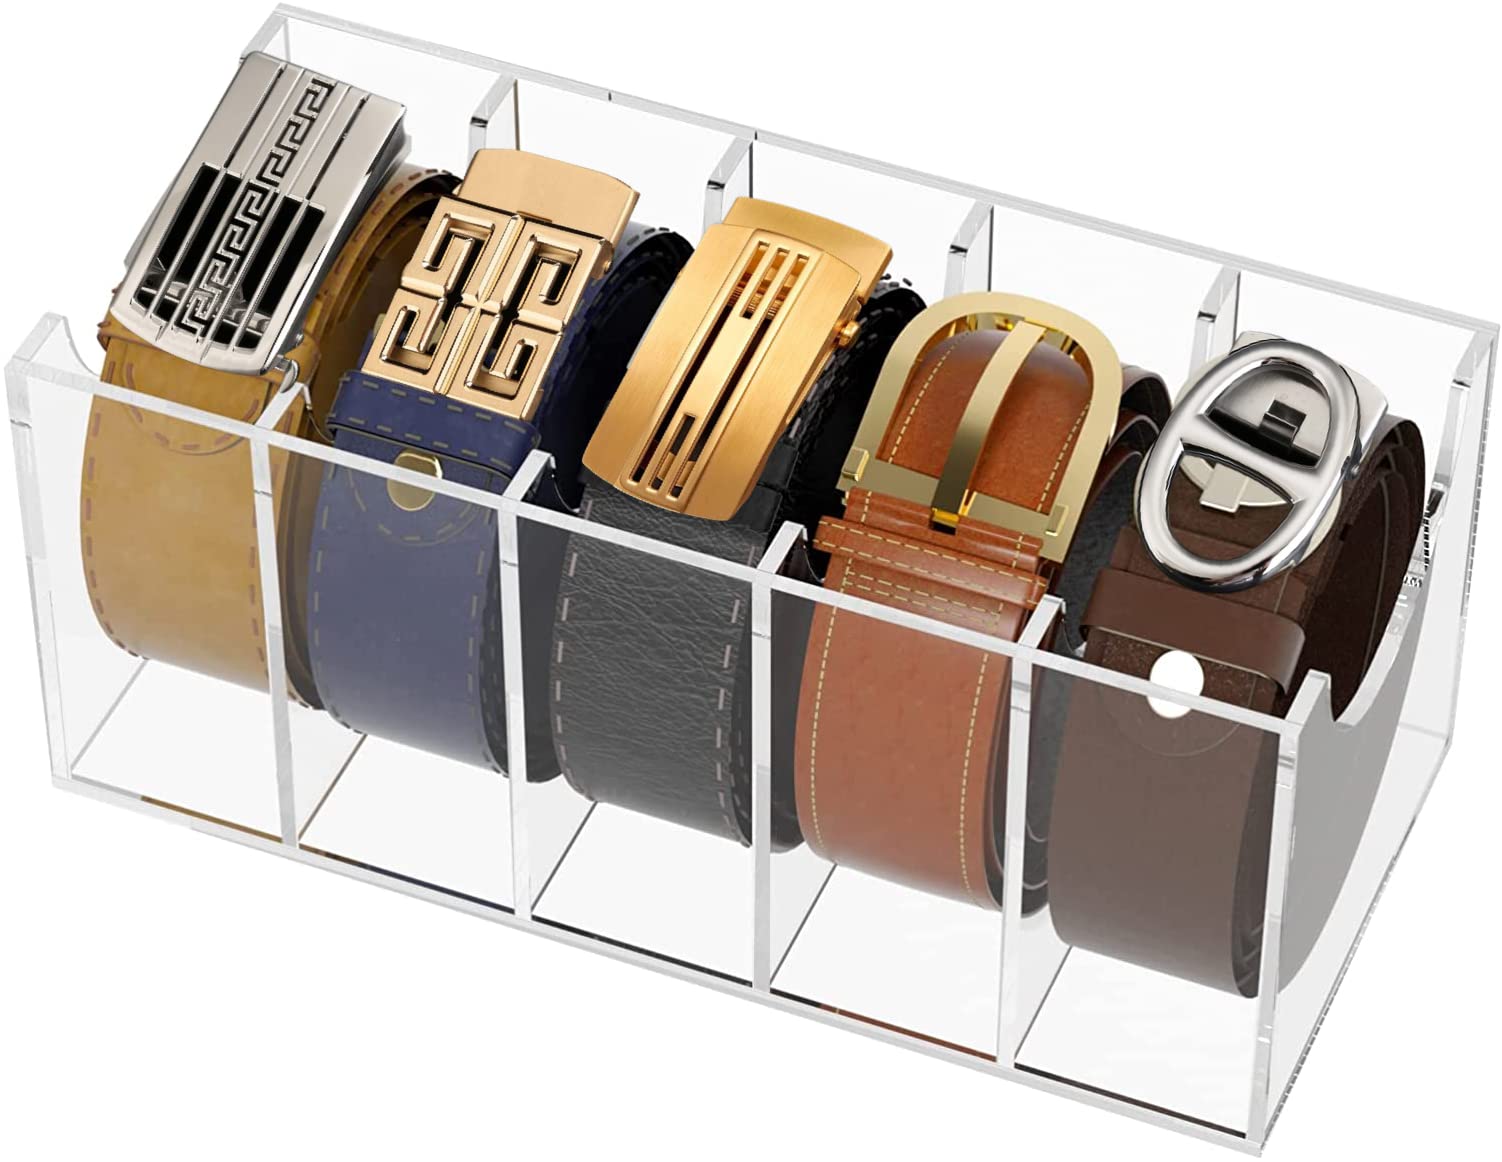 Belt Organizer, Acrylic Belt Storage Holder for The Closet, 5 Compartments Display Case for Tie and Bow Tie, Belt Storage & Display Box (2021111912)